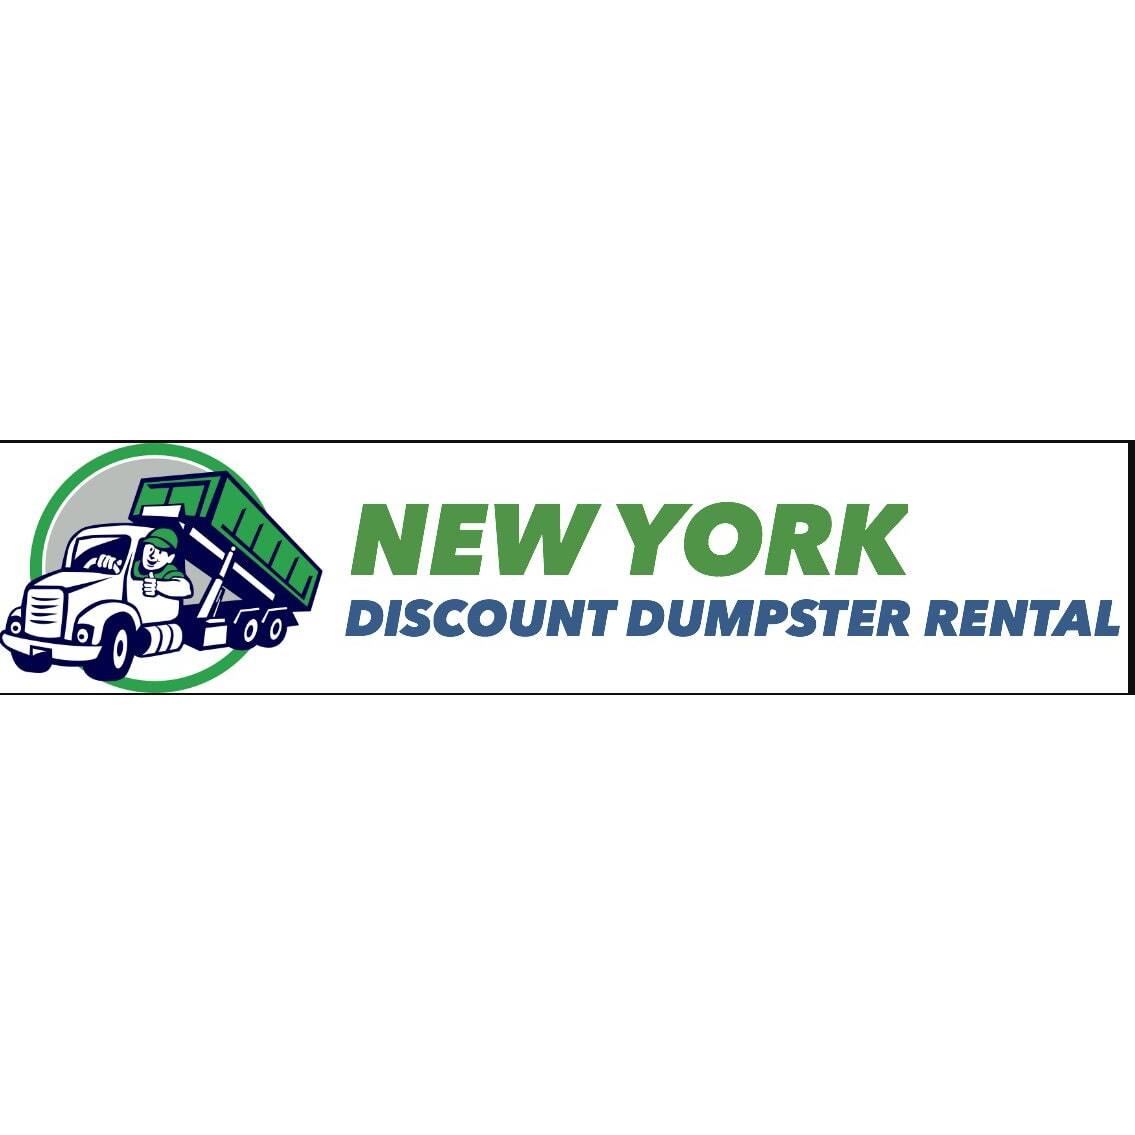 Discount Dumpster Rental New York - New York, NY 10011 - (646)859-1988 | ShowMeLocal.com